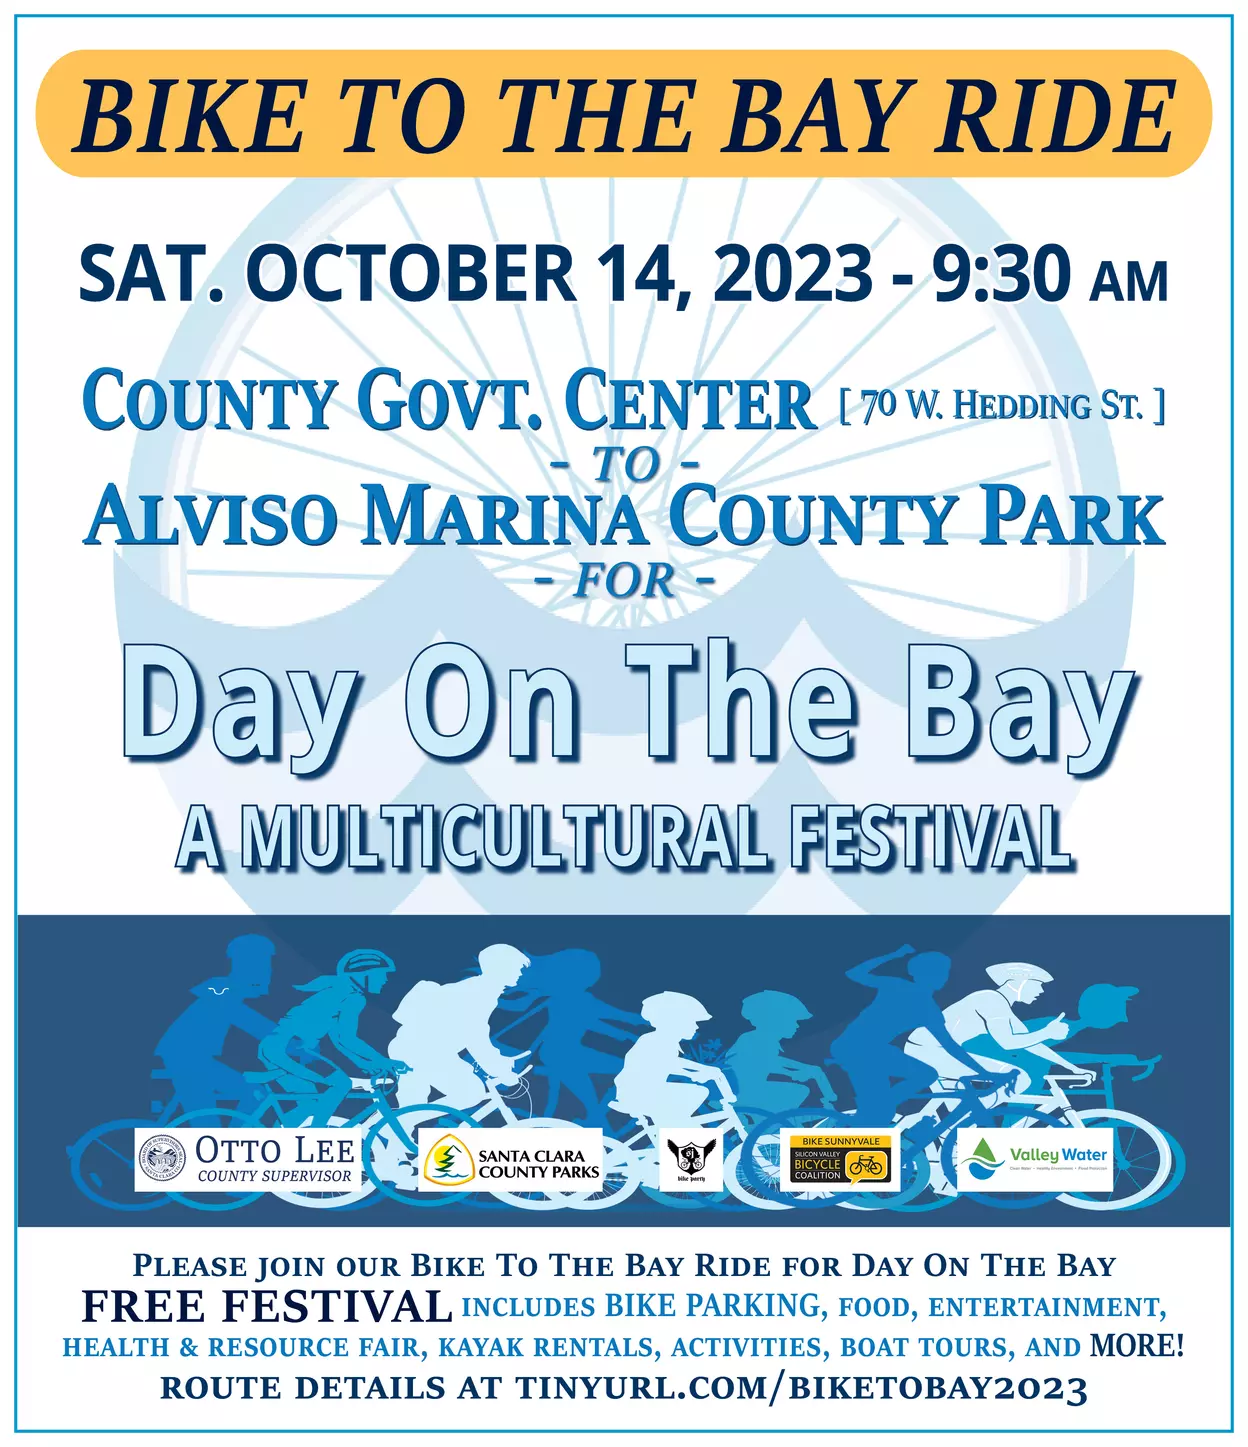 flyer for bike to the bay 2023 9 AM on October 14